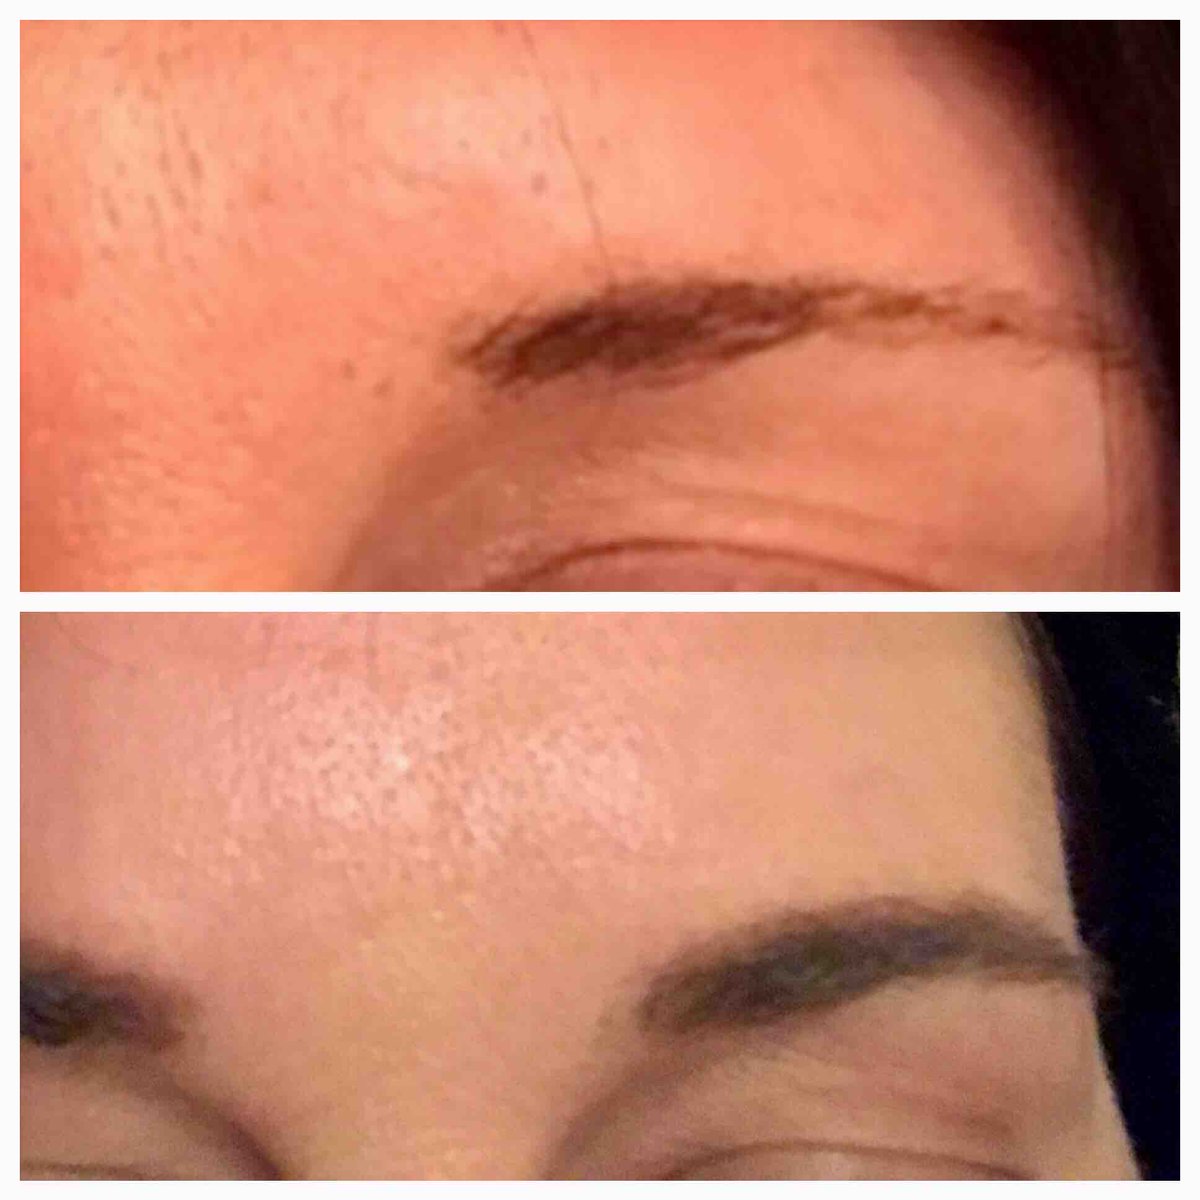 Did you know #Latisse can help your #eyebrows grow, too? Pic sent to us by a patient who bought it for her #eyelashes and decided to try it on her brows as well. 3 ml and 5 ml vials available. #drannetrussell #seibellamedspa #LittleRock #beauty #medspa #doctor 😘501-228-6237